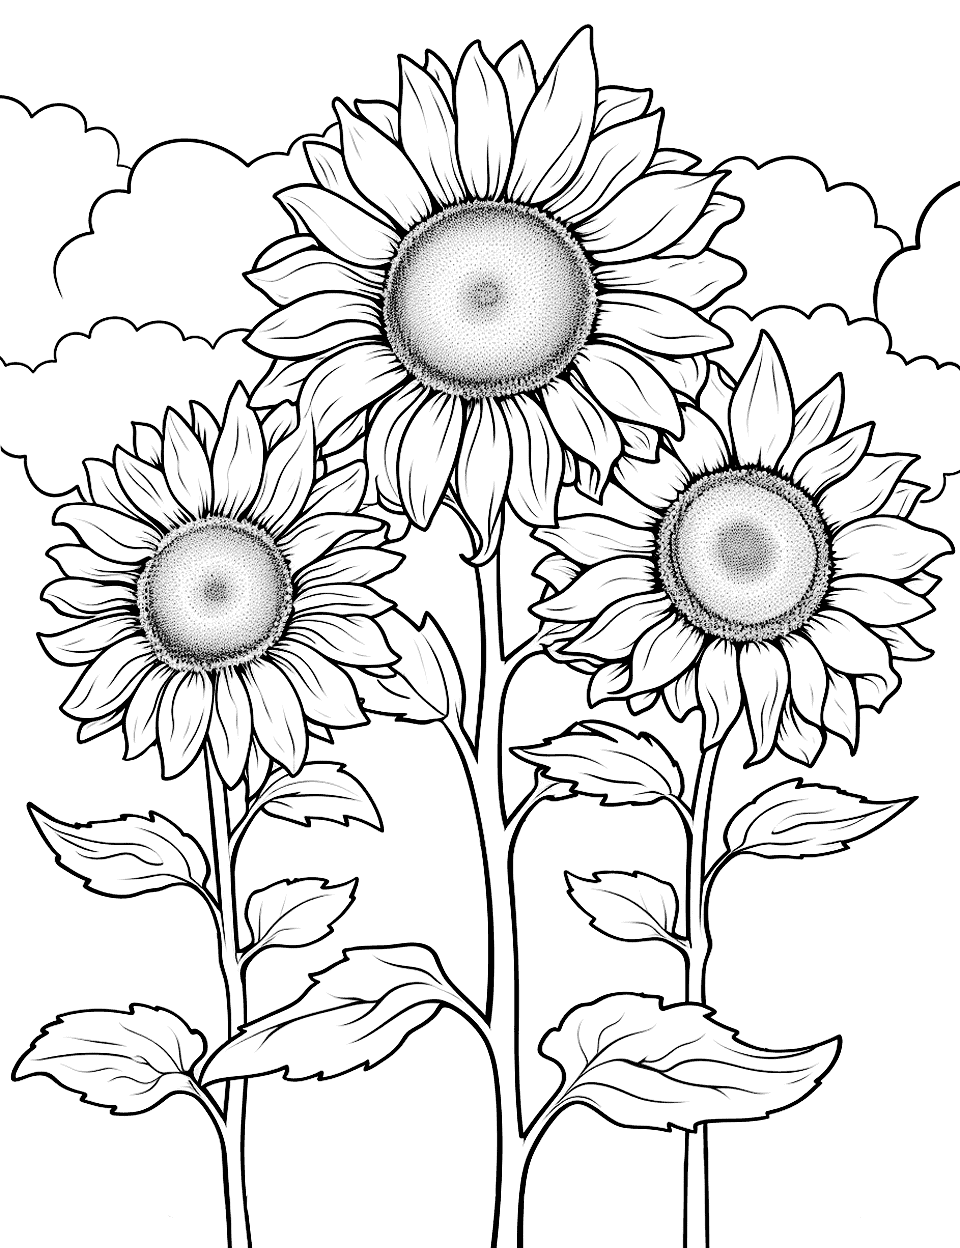 Sunflower coloring pages free printable sheets